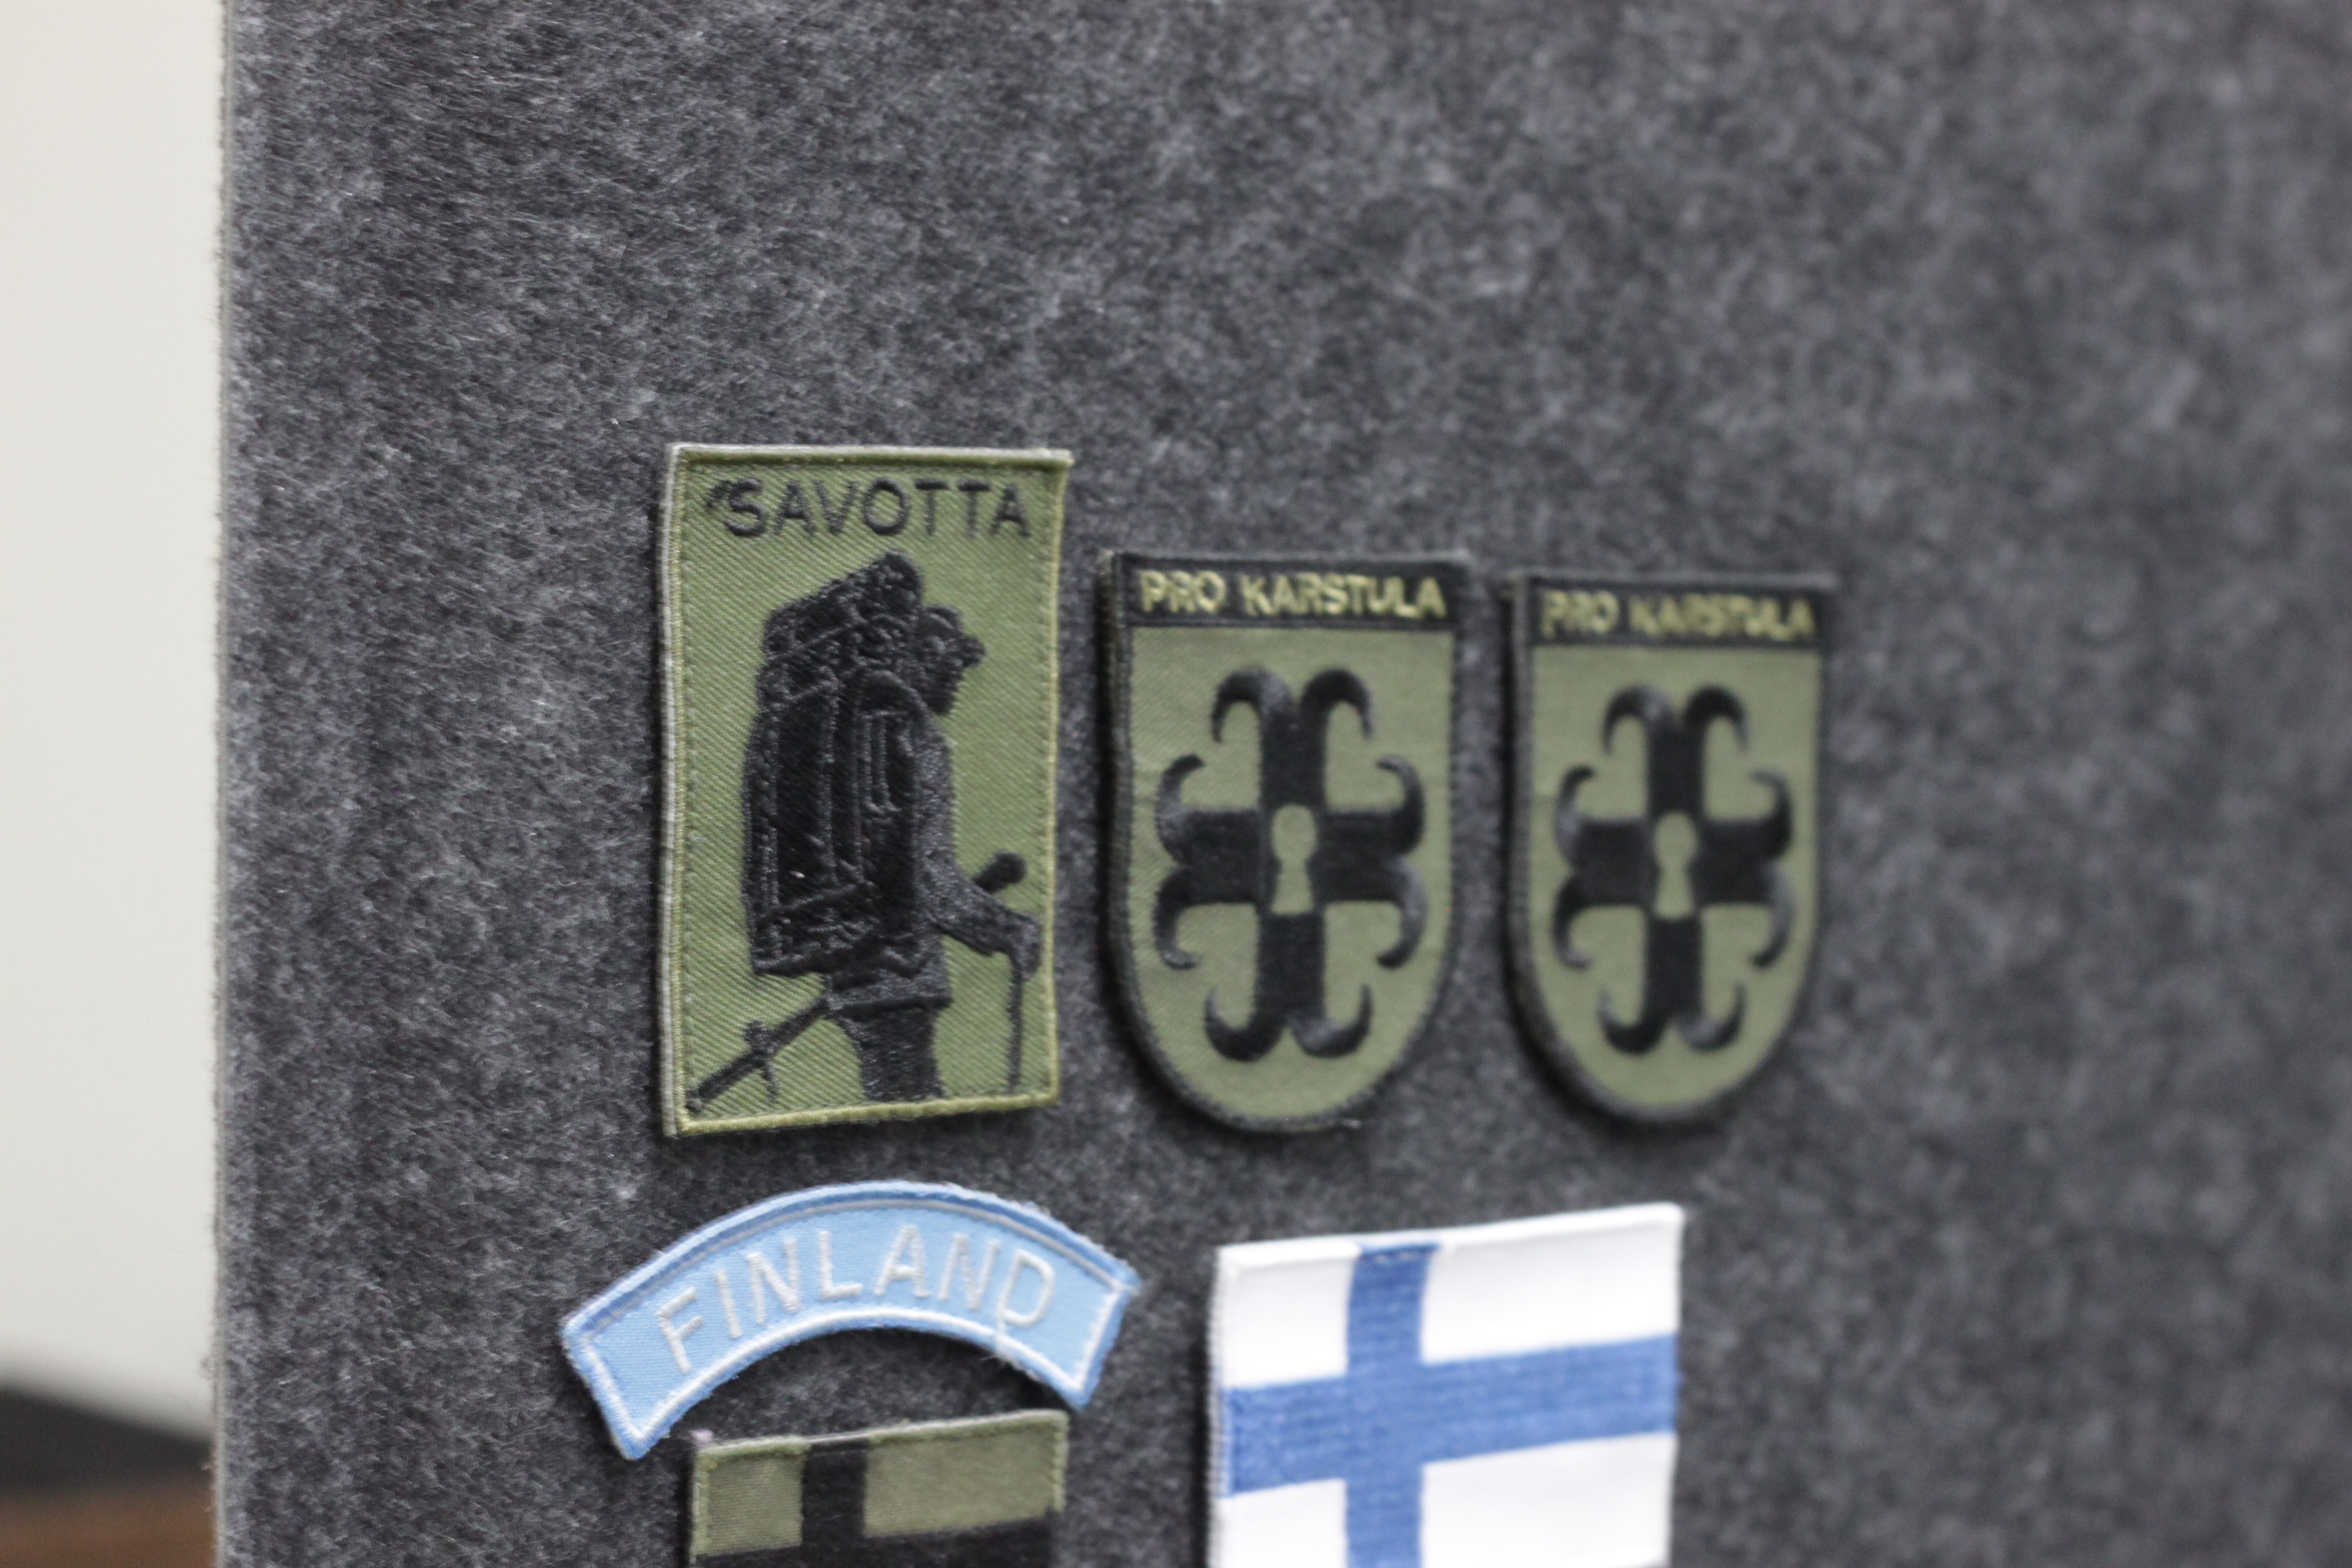 Noble and blue Savotta patches